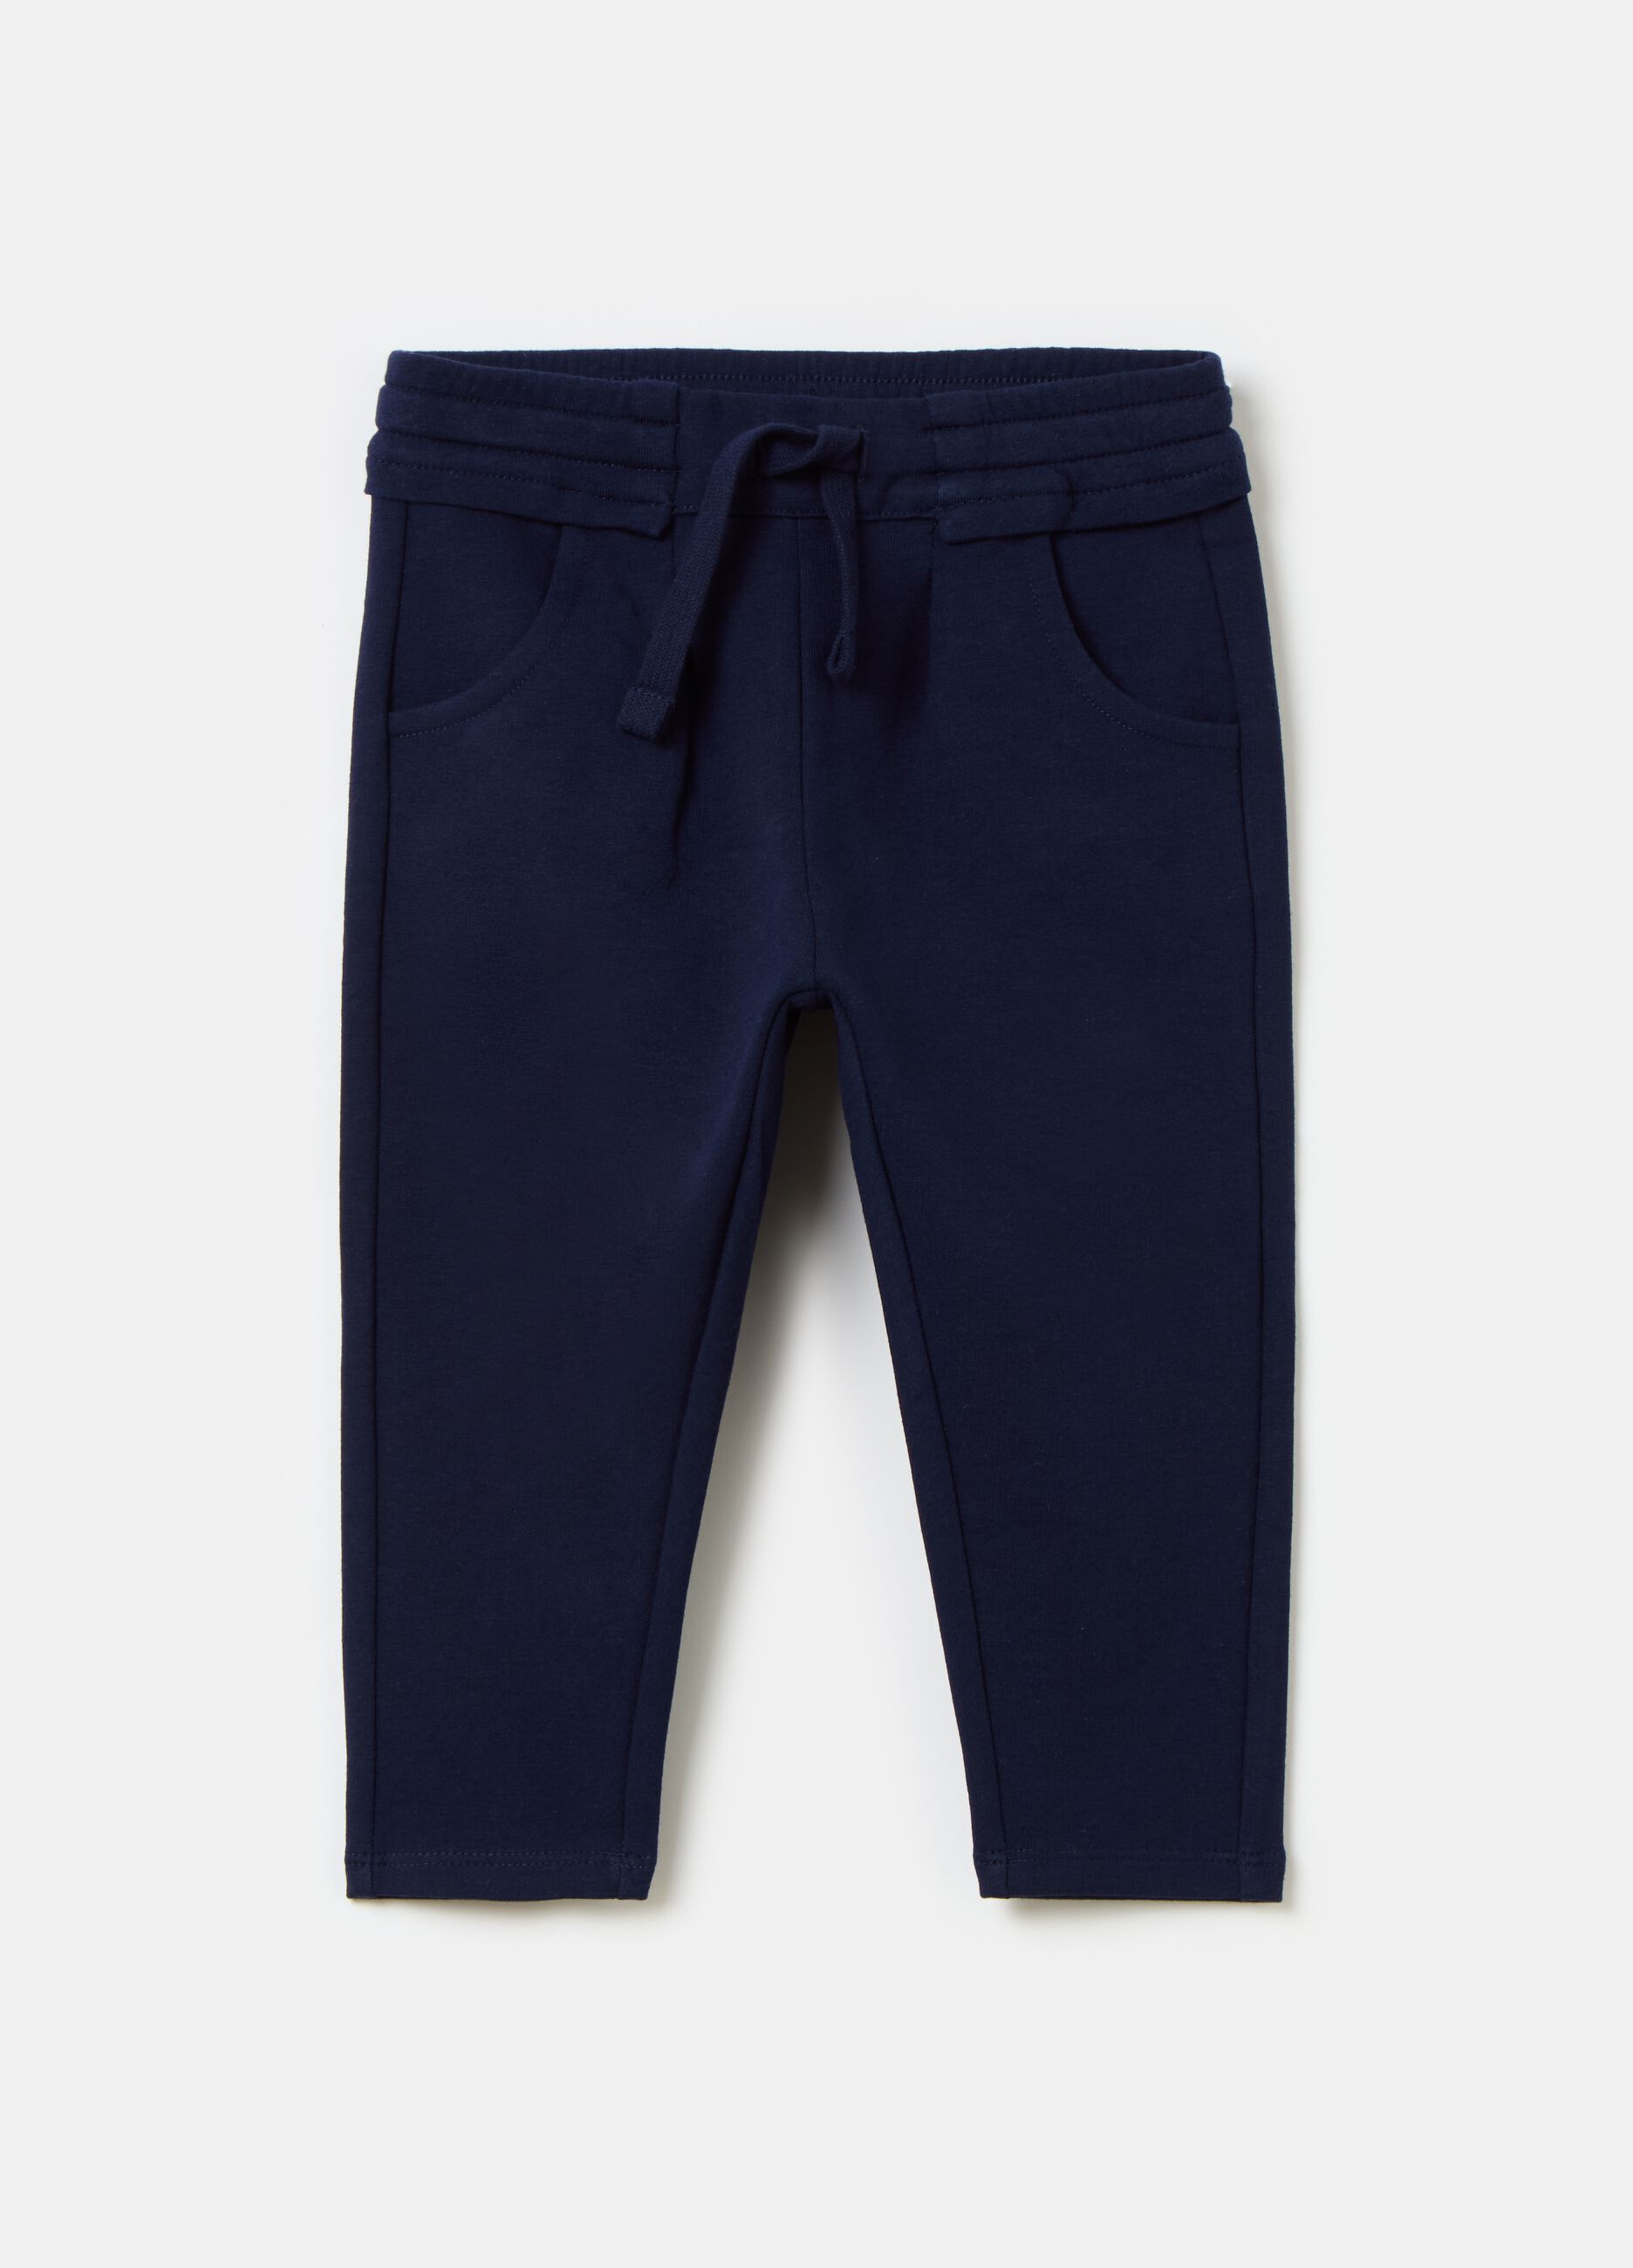 Solid colour joggers with drawstring